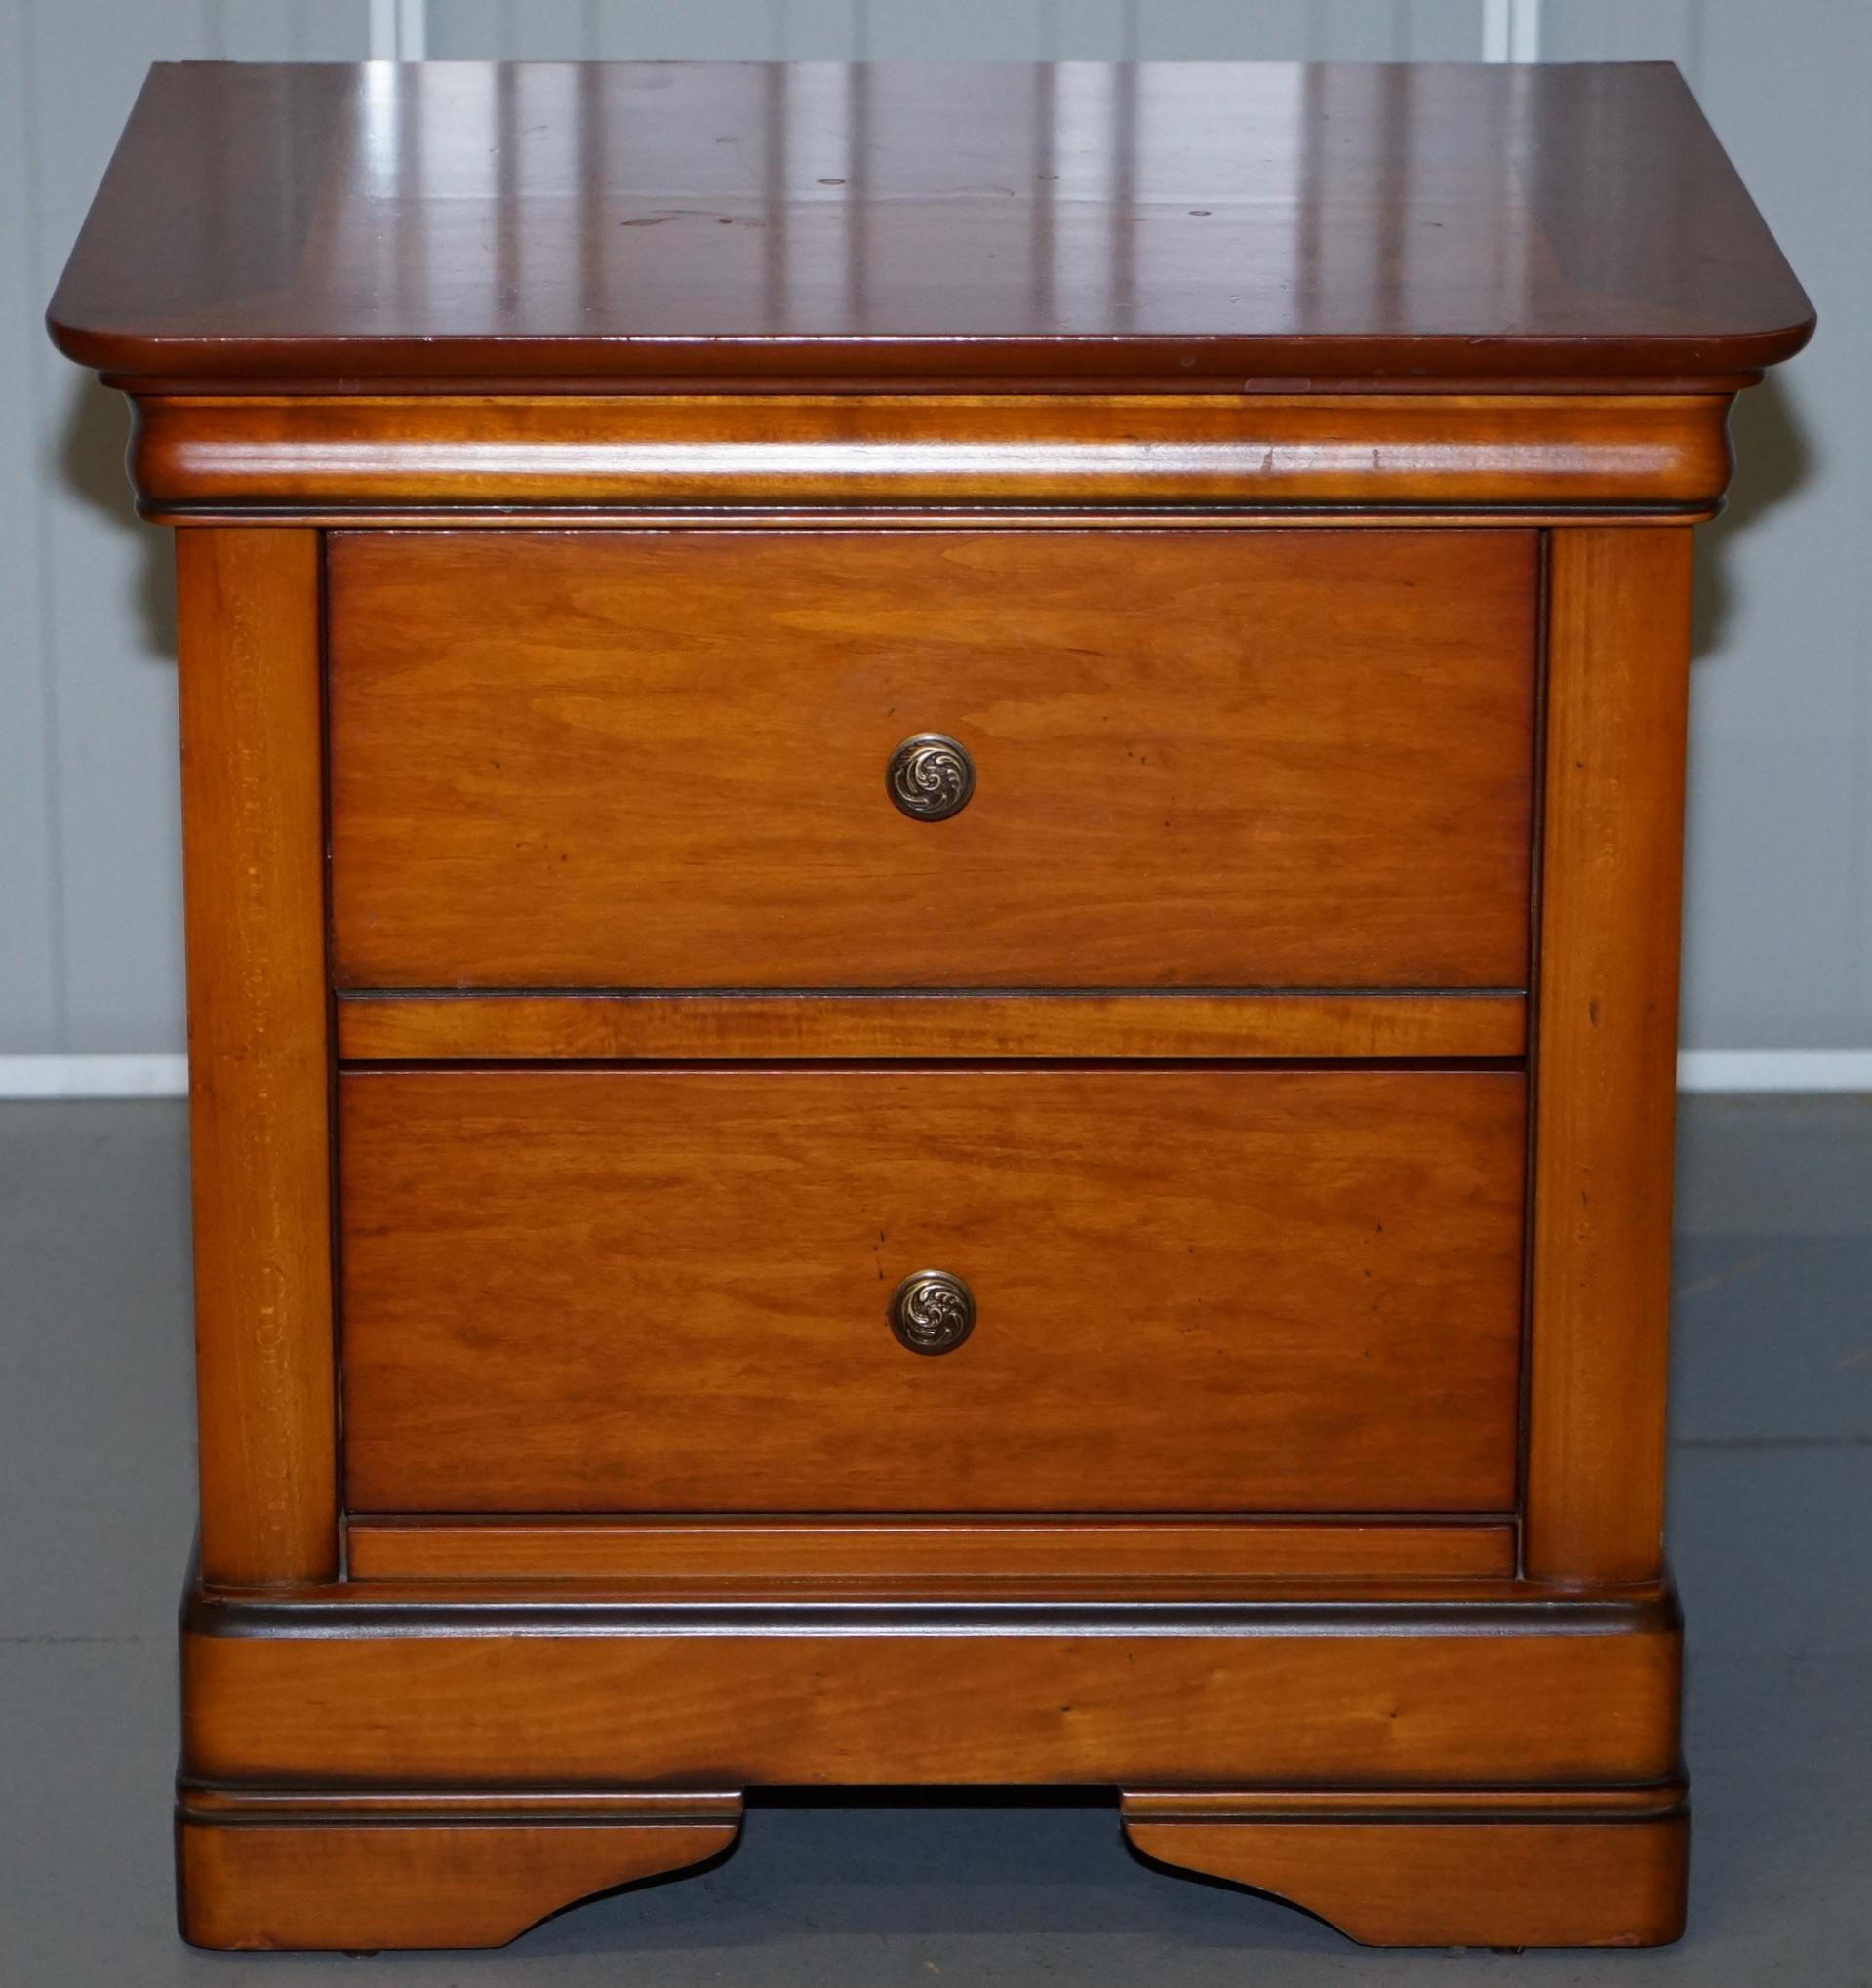 Wimbledon-Furniture

Wimbledon-Furniture is delighted to offer for sale this lovely bedside table chest of drawers

Please note the delivery fee listed is just a guide, it covers within the M25 only, for an accurate quote please send me your